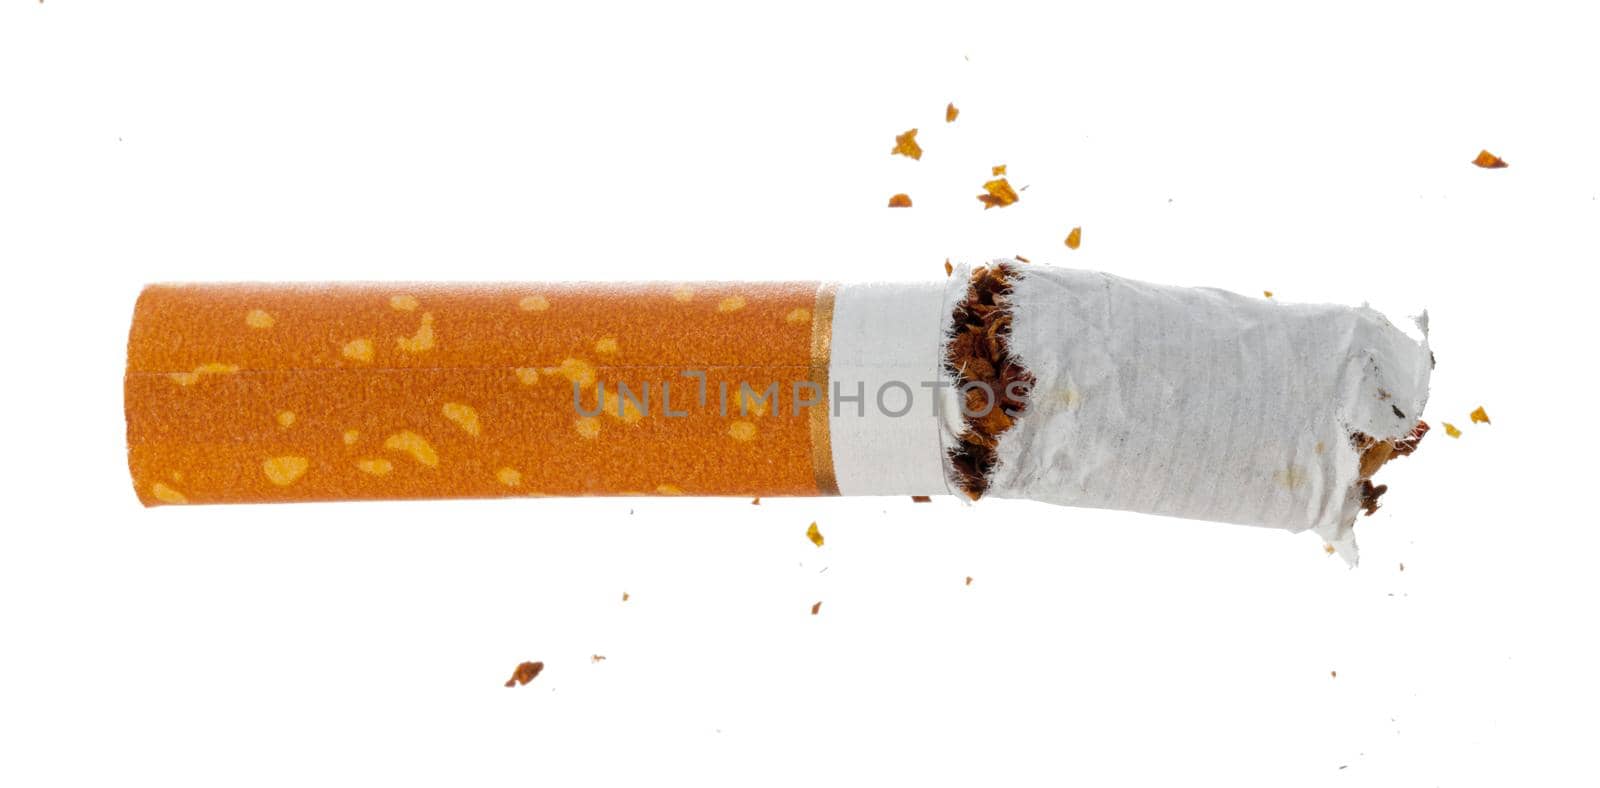 Broken cigarette isolated on white background close up by Fabrikasimf